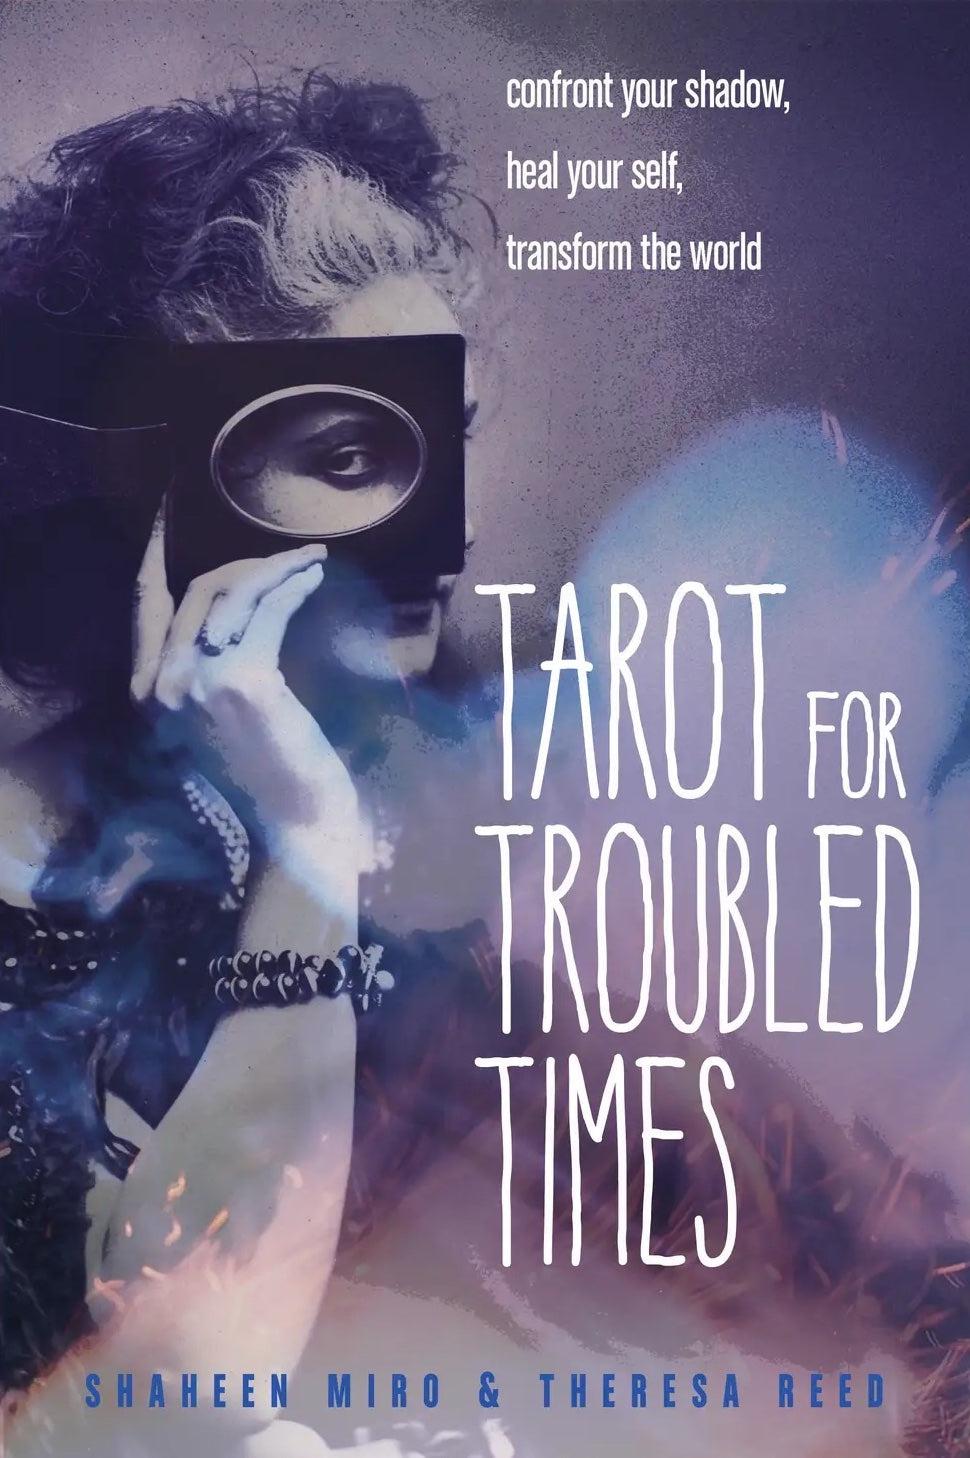 Tarot for Troubled Times: Confront Yourself, Heal Yourself, Transform the World